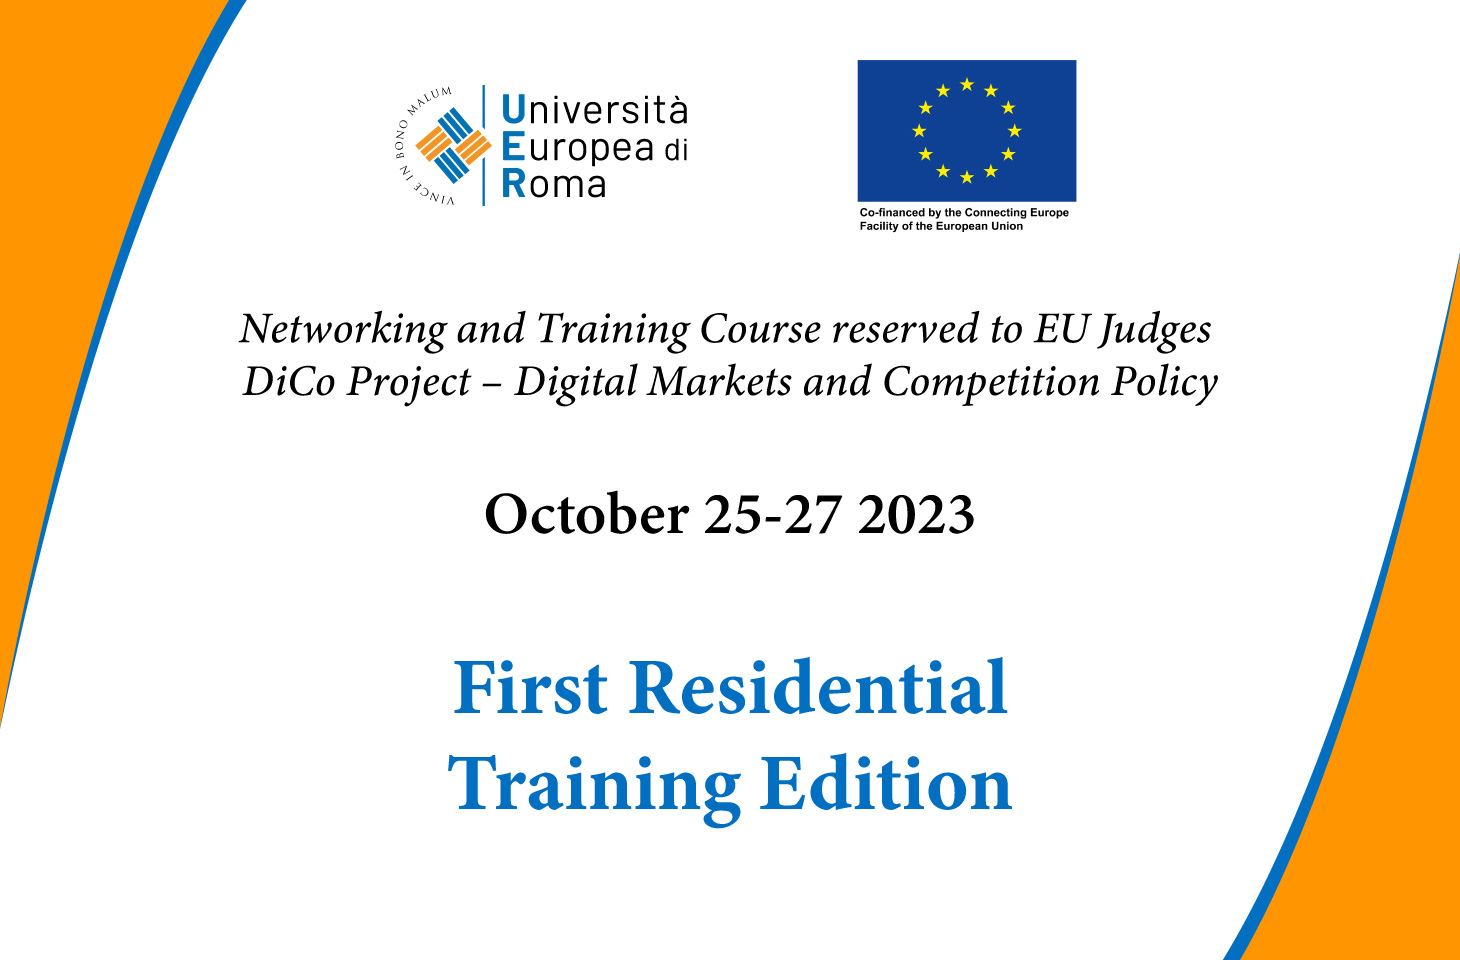 First Residential Training Edition